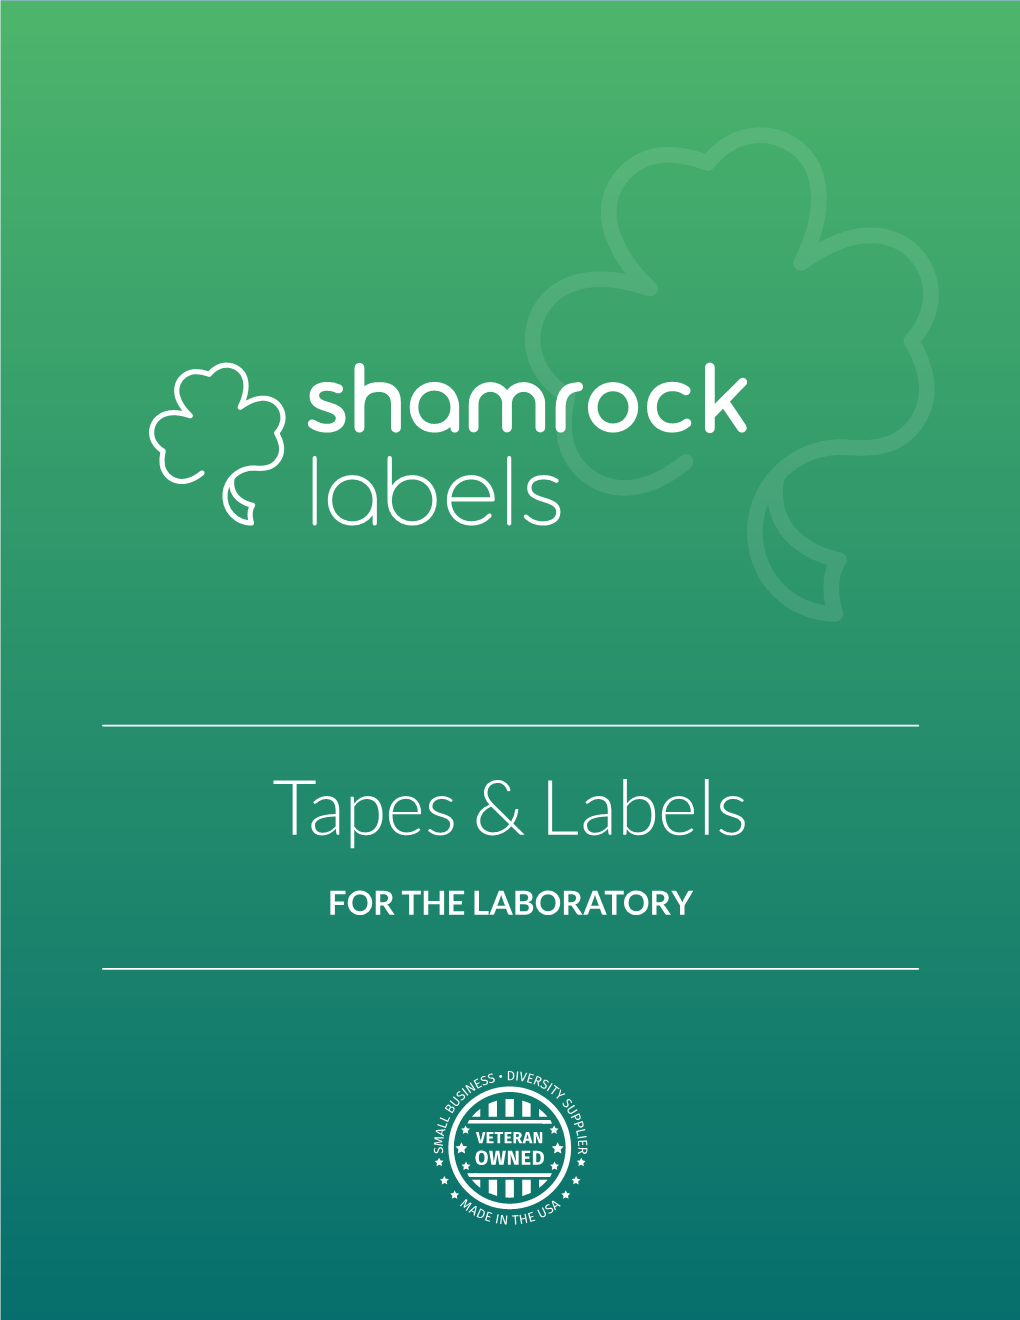 Tapes & Labels for the LABORATORY